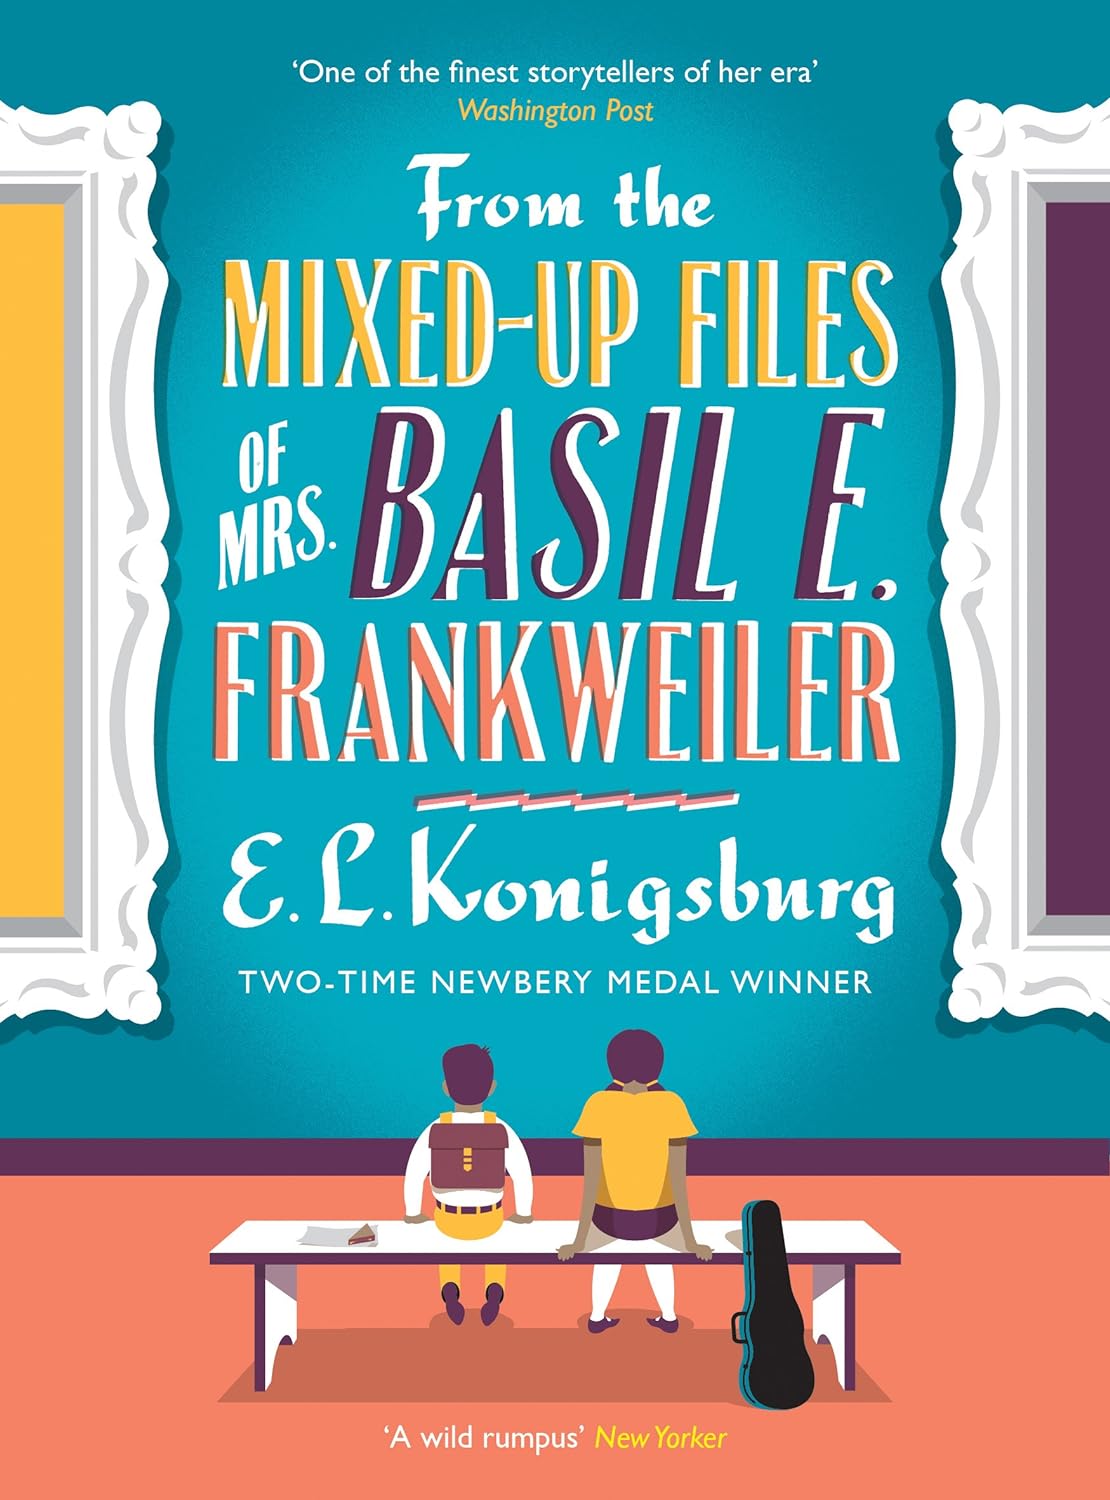 From the Mixed -Up Files of Mrs. Basil E. Frankweiler by EL Konigsburg